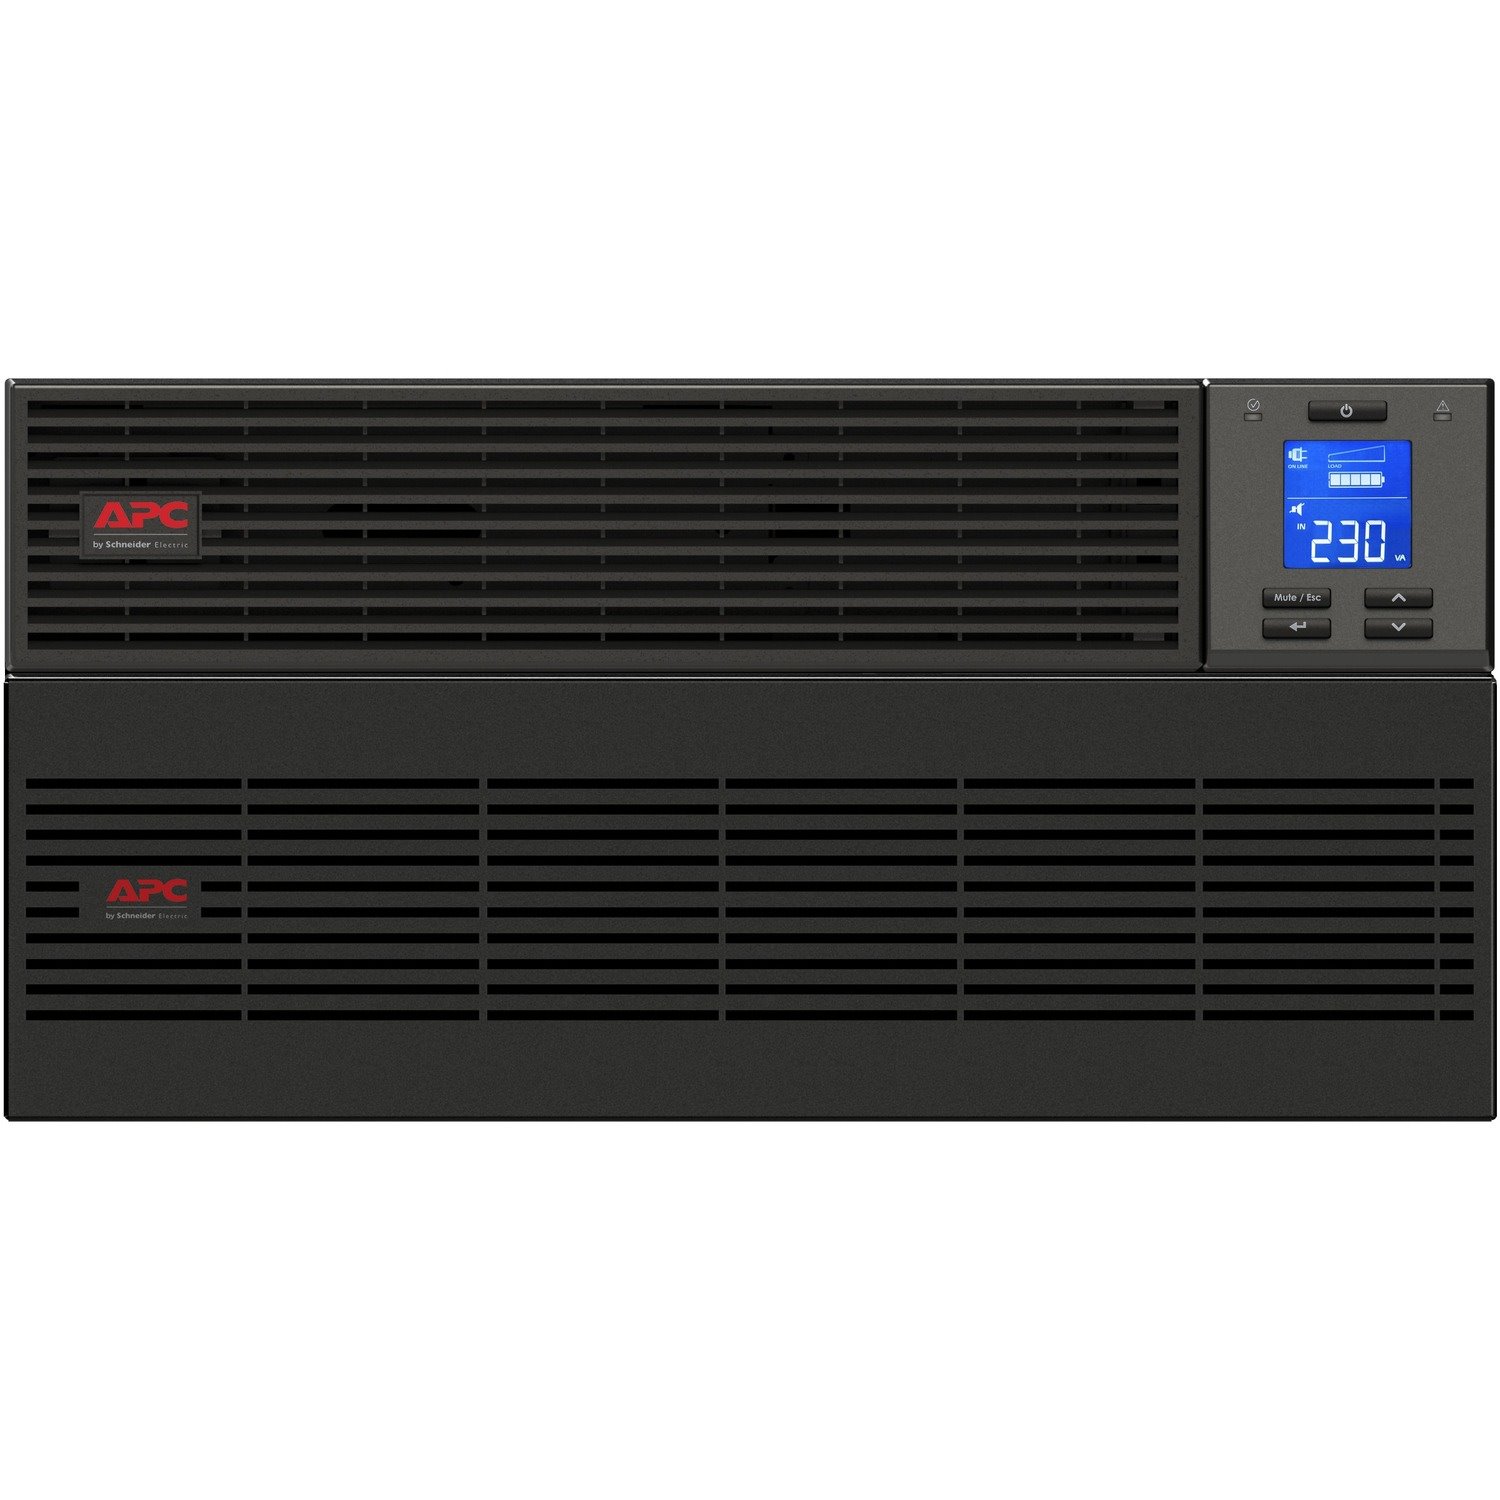 APC by Schneider Electric Easy UPS SRV6KRIL Double Conversion Online UPS - 6 kVA/6 kW